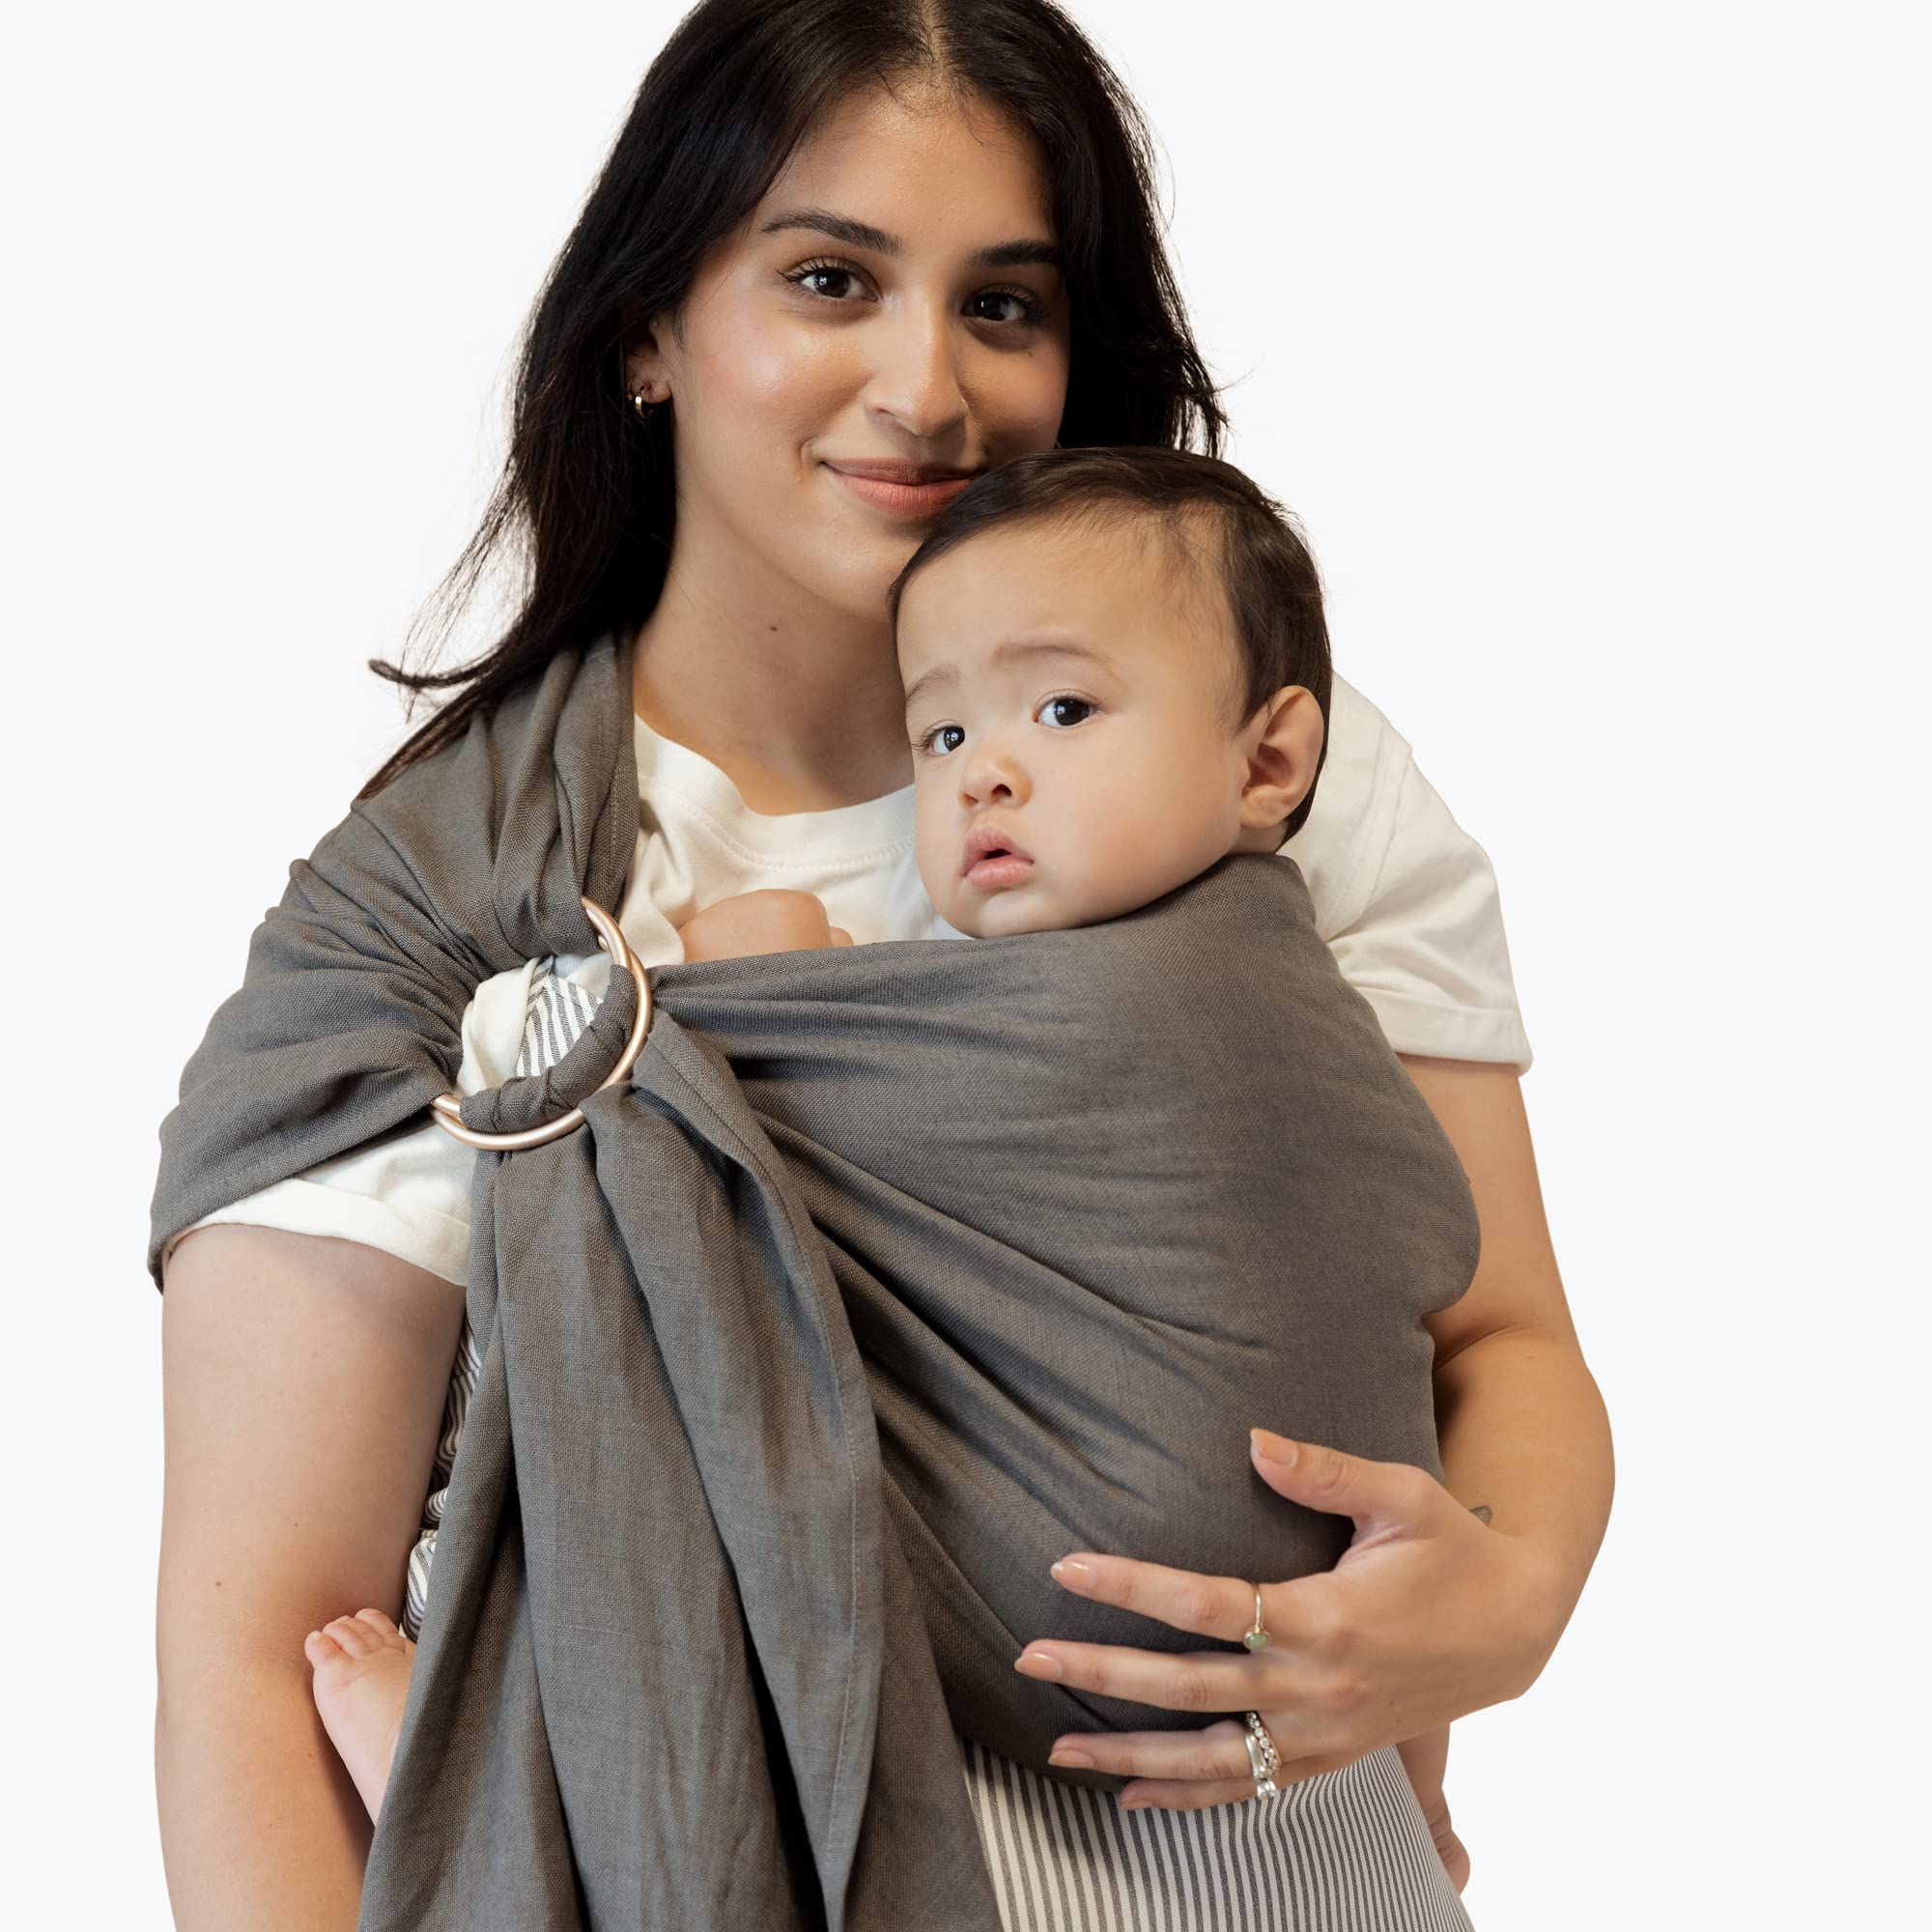 WildBird Ring Sling Baby Carrier for New Moms & Dads & Caregivers - Made from 100% Belgium Linen - for Newborns to Toddlers Up to 35 lbs - Standard 74